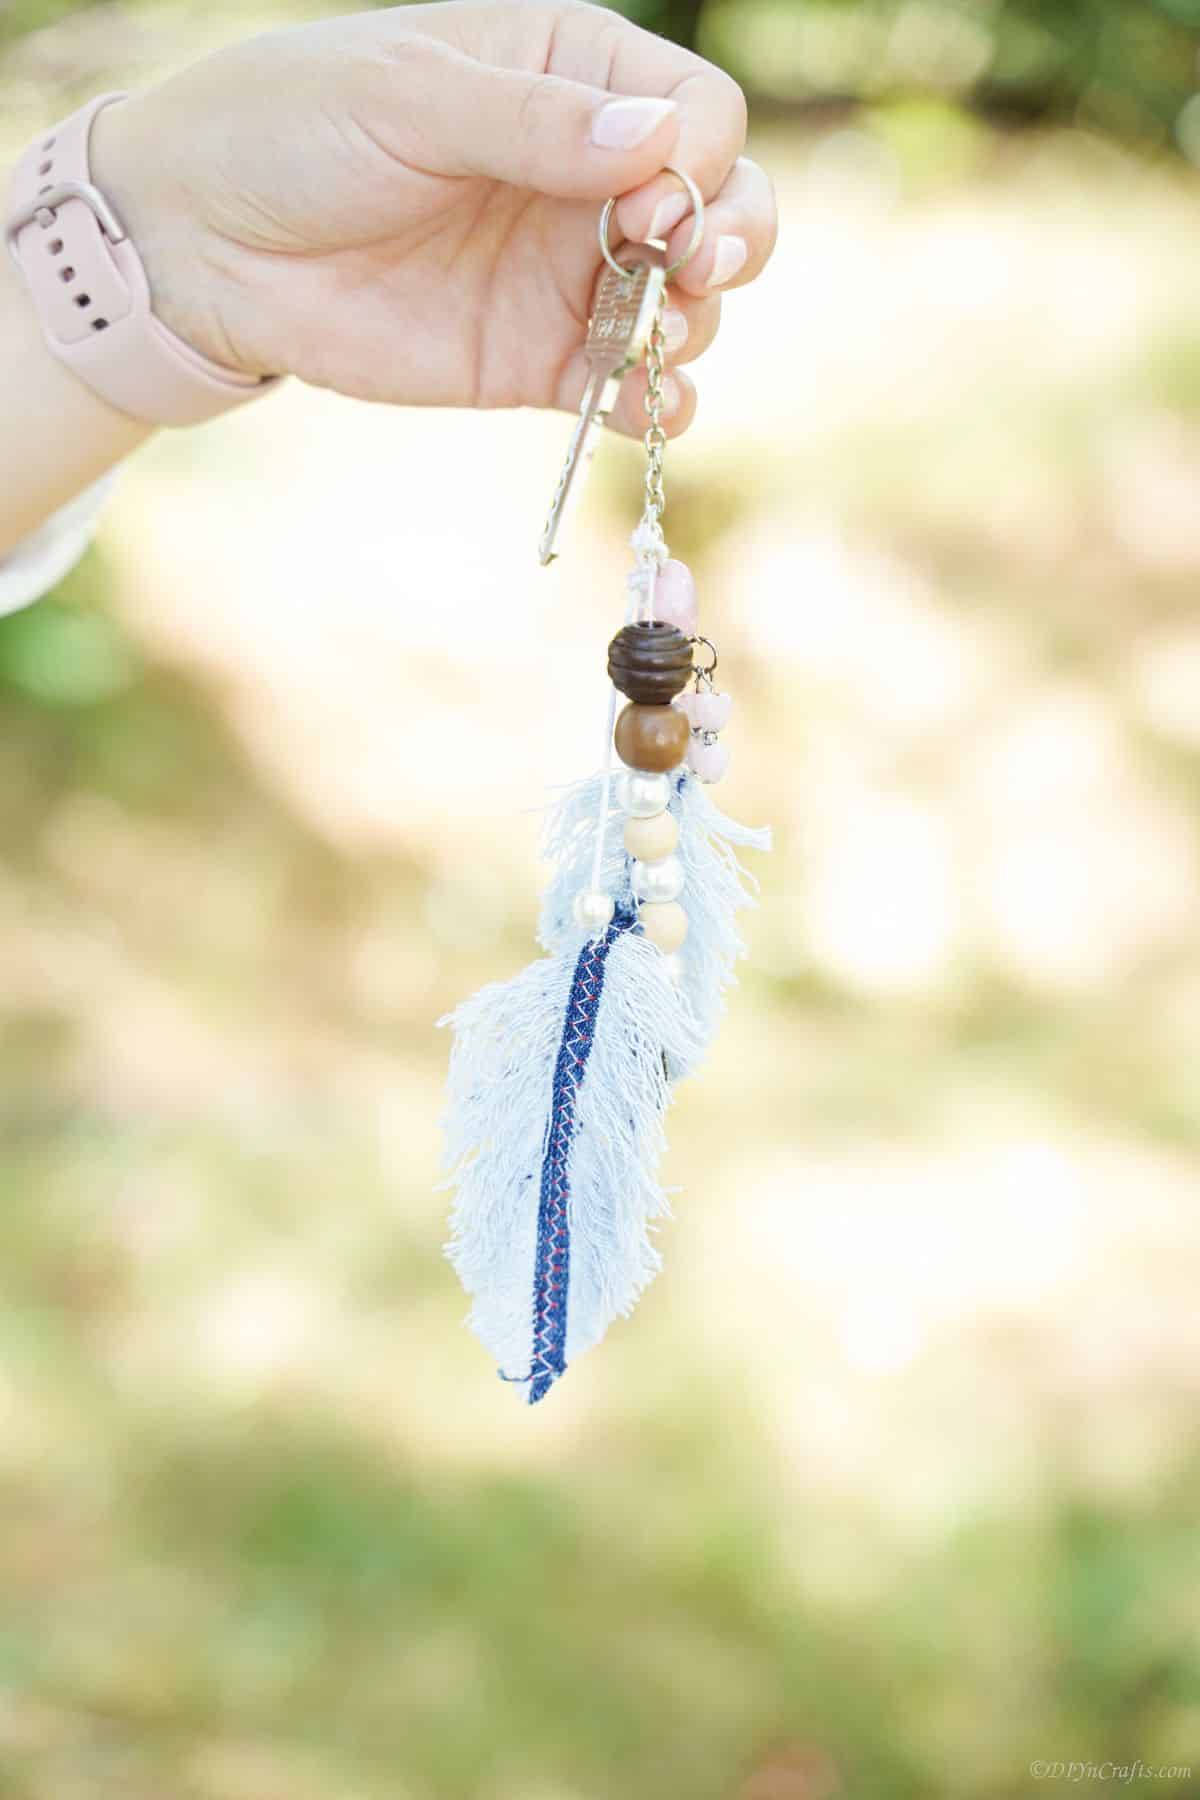 hand holding denim feather keychain outside